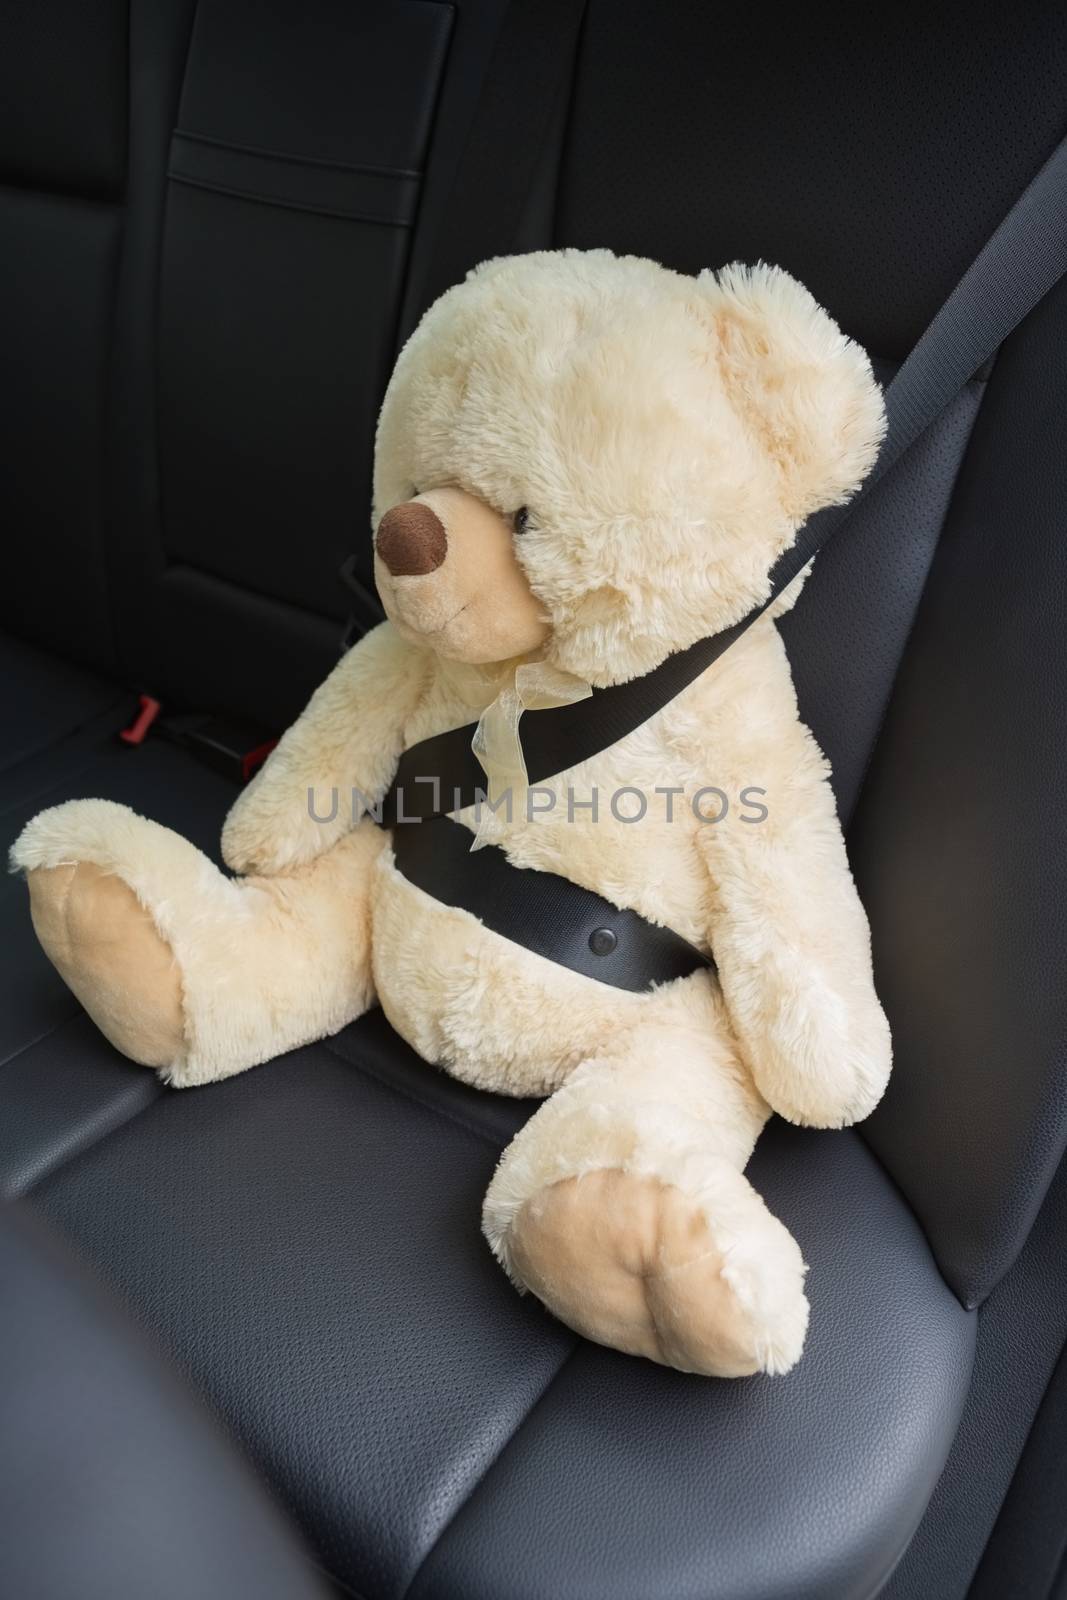 Teddy bear strapped in with seat belt in back seat of car